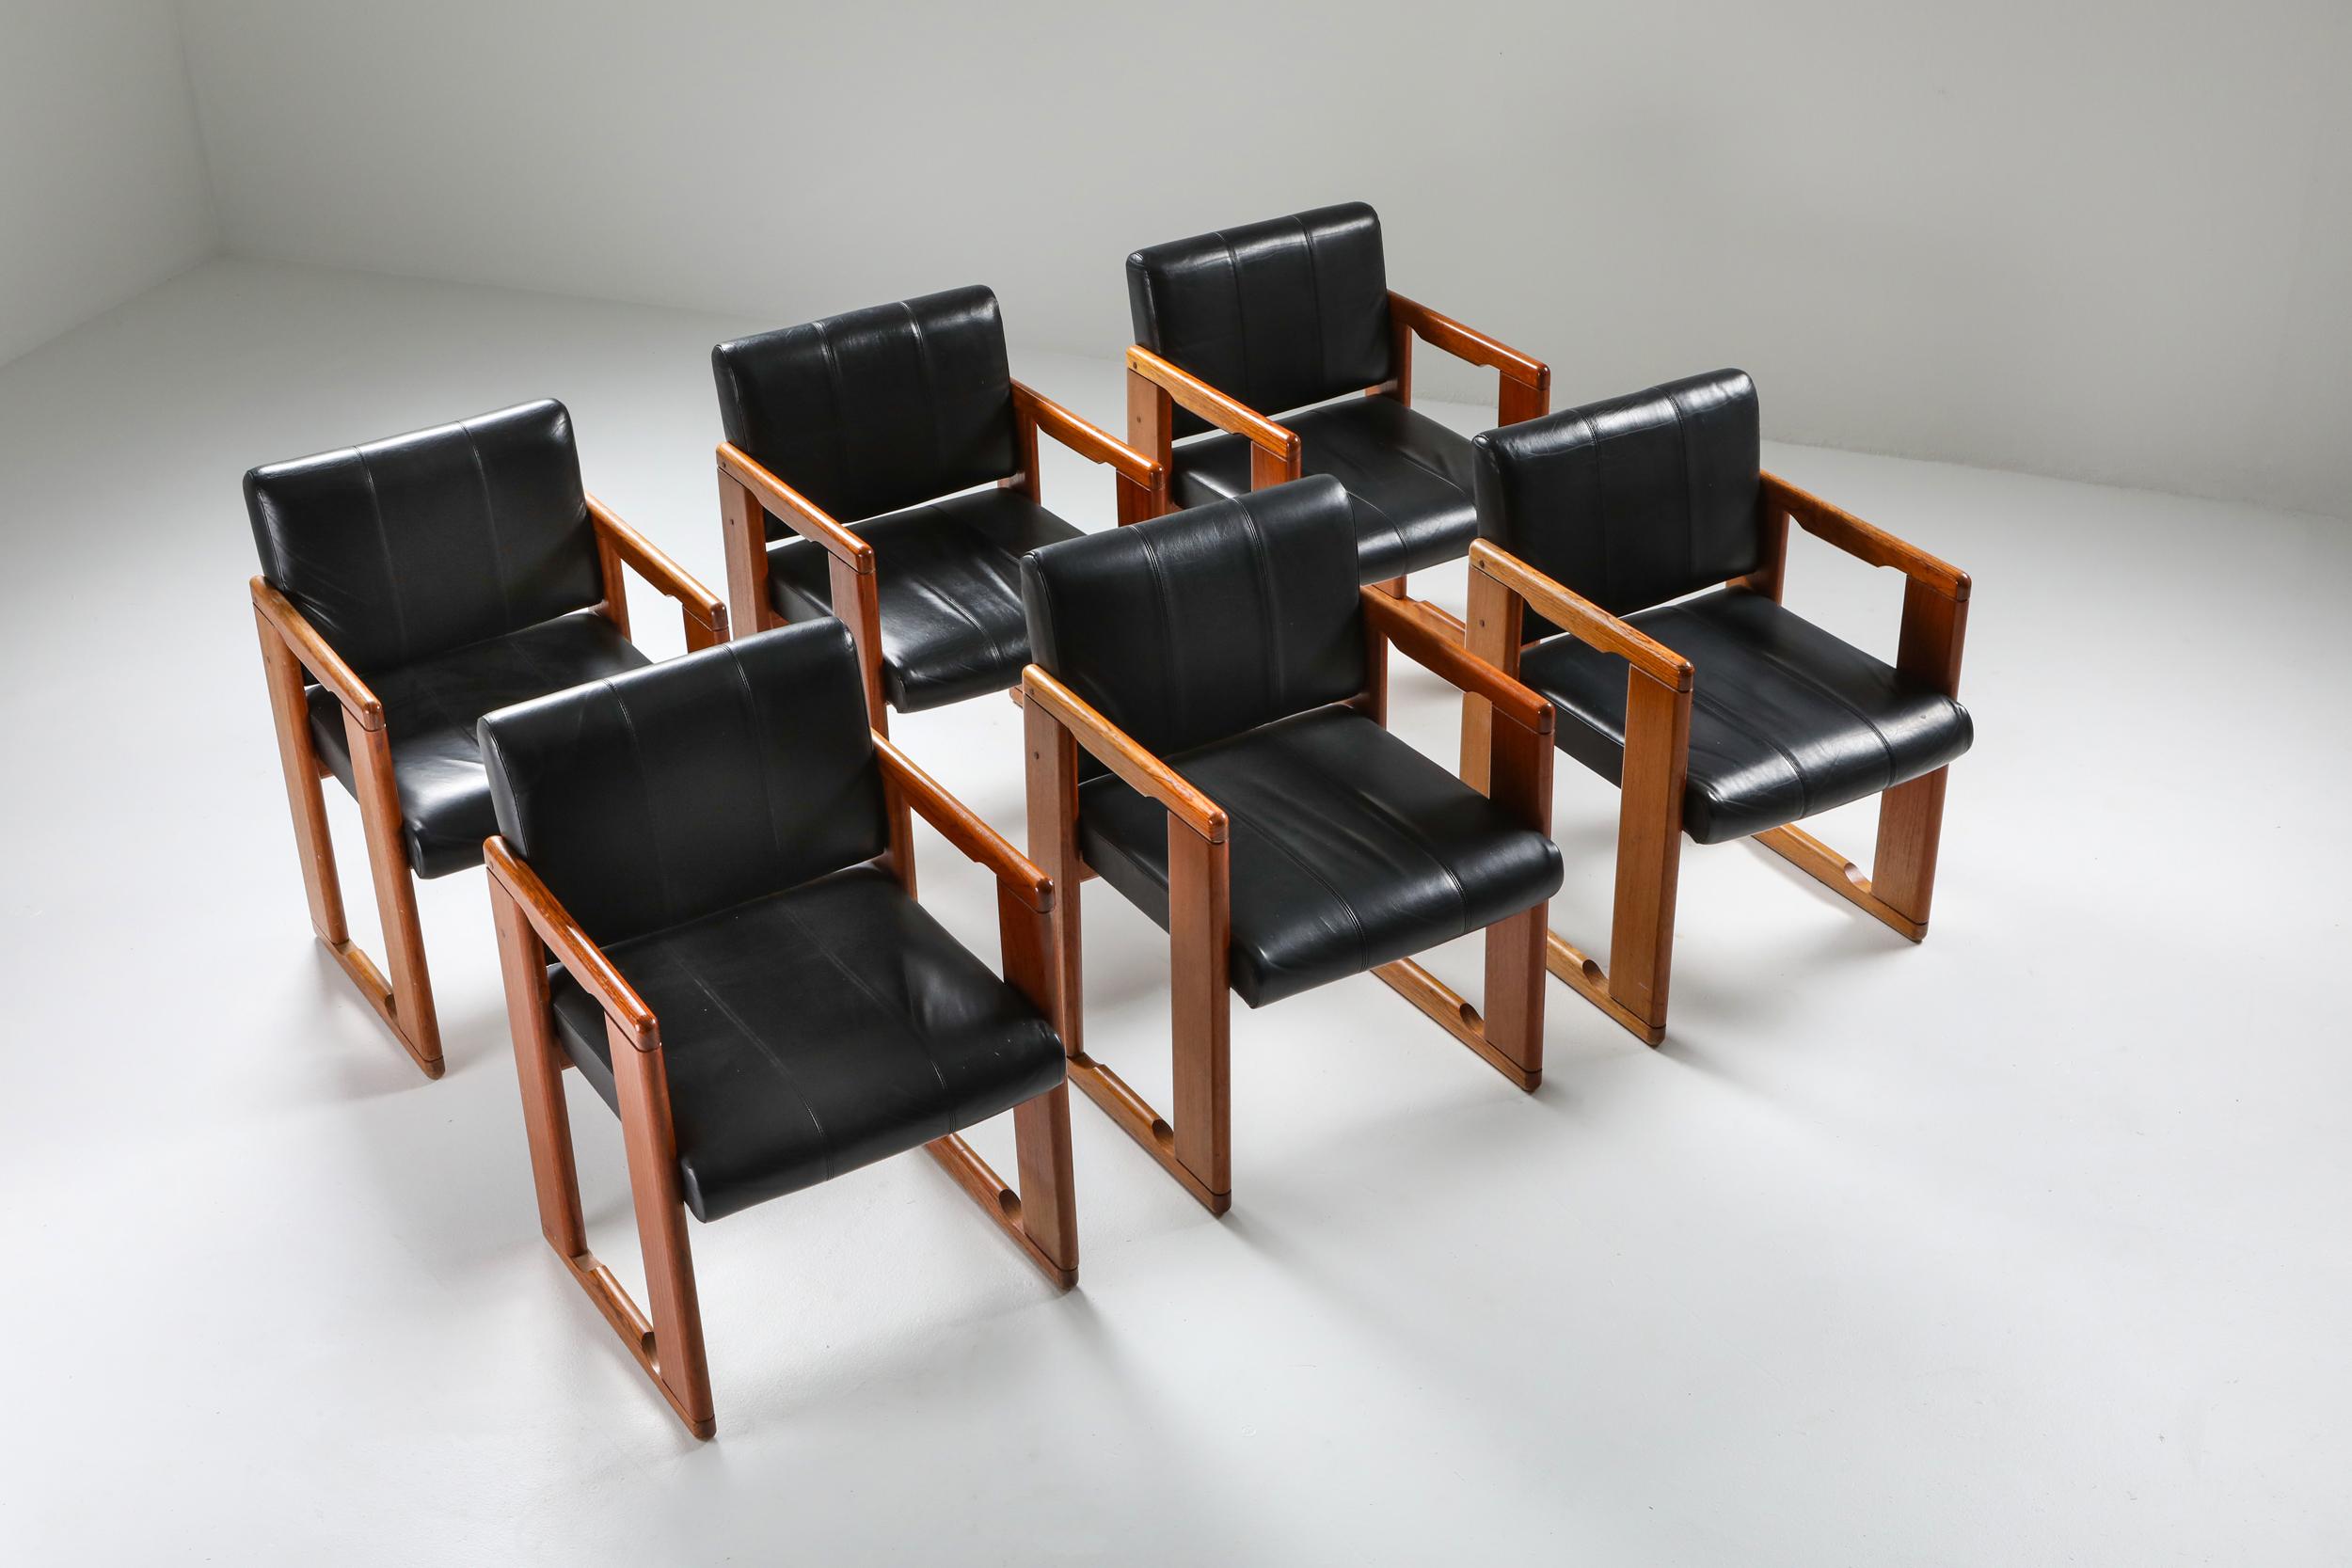 Afra e Tobia Scarpa, black leather ‘dialogo’ chairs, B&B Italia, Italy 1974
Gorgeous combination of a walnut frame with black original leather seating.
We do have an expert in house upholstery in case you prefer another type of fabric.

Afra